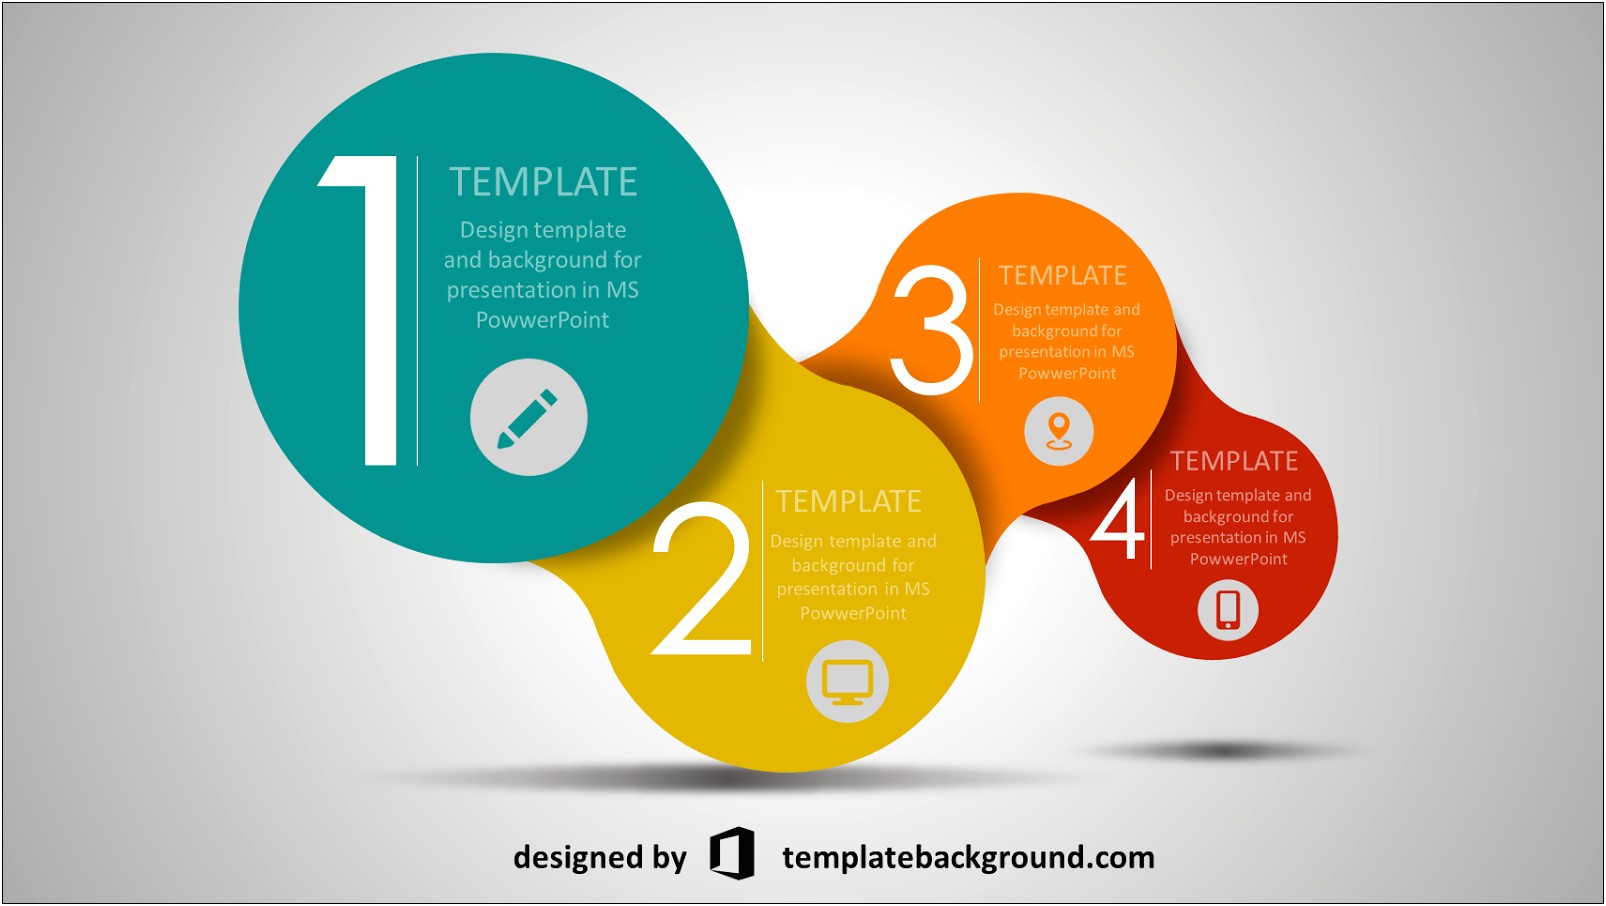 Download Cool Templates For Powerpoint 2010